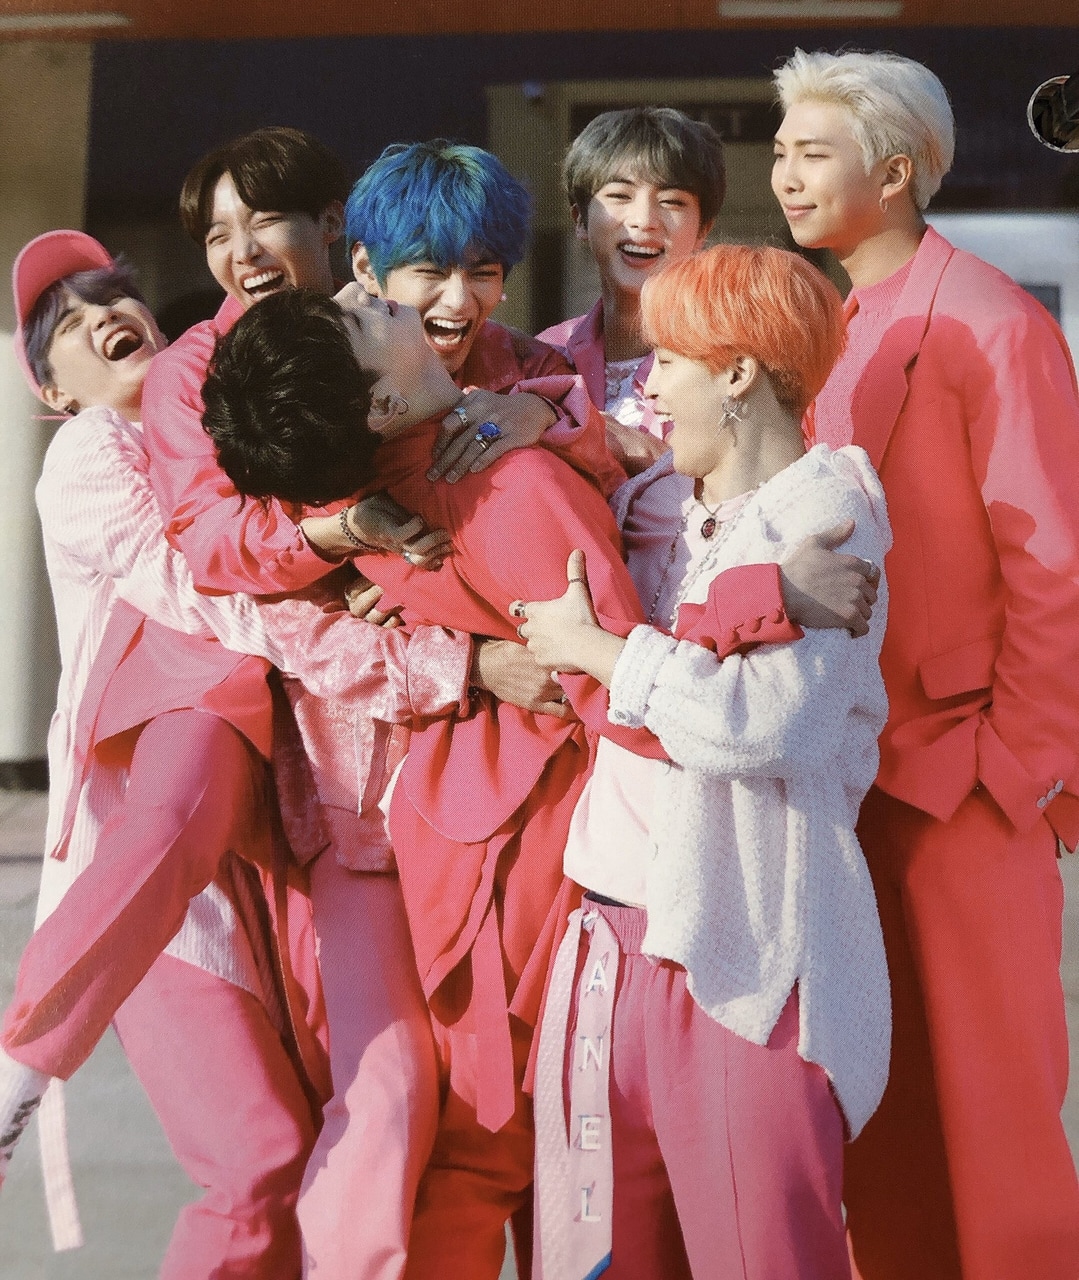 Bts Boy With Luv Wallpapers